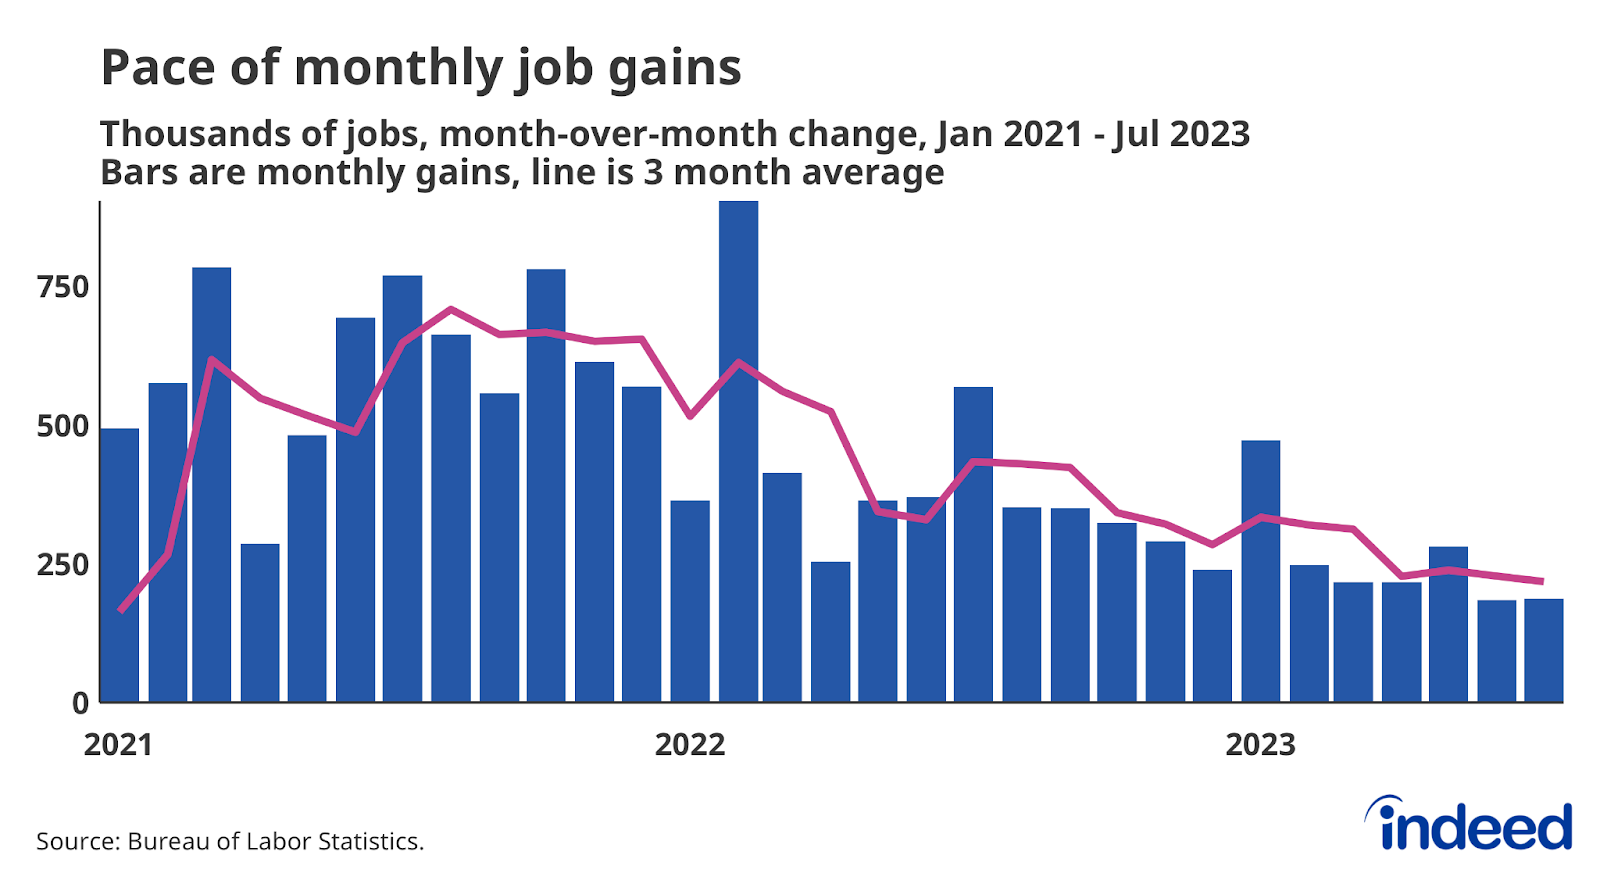 A graph titled “Pace of monthly job gains” showing the month-over-month gain in payroll jobs as bars and the three-month average as a line. The vertical axis spans from 0 to 750,000 jobs. The graph shows job gains slowing down over the course of 2022 and 2023.